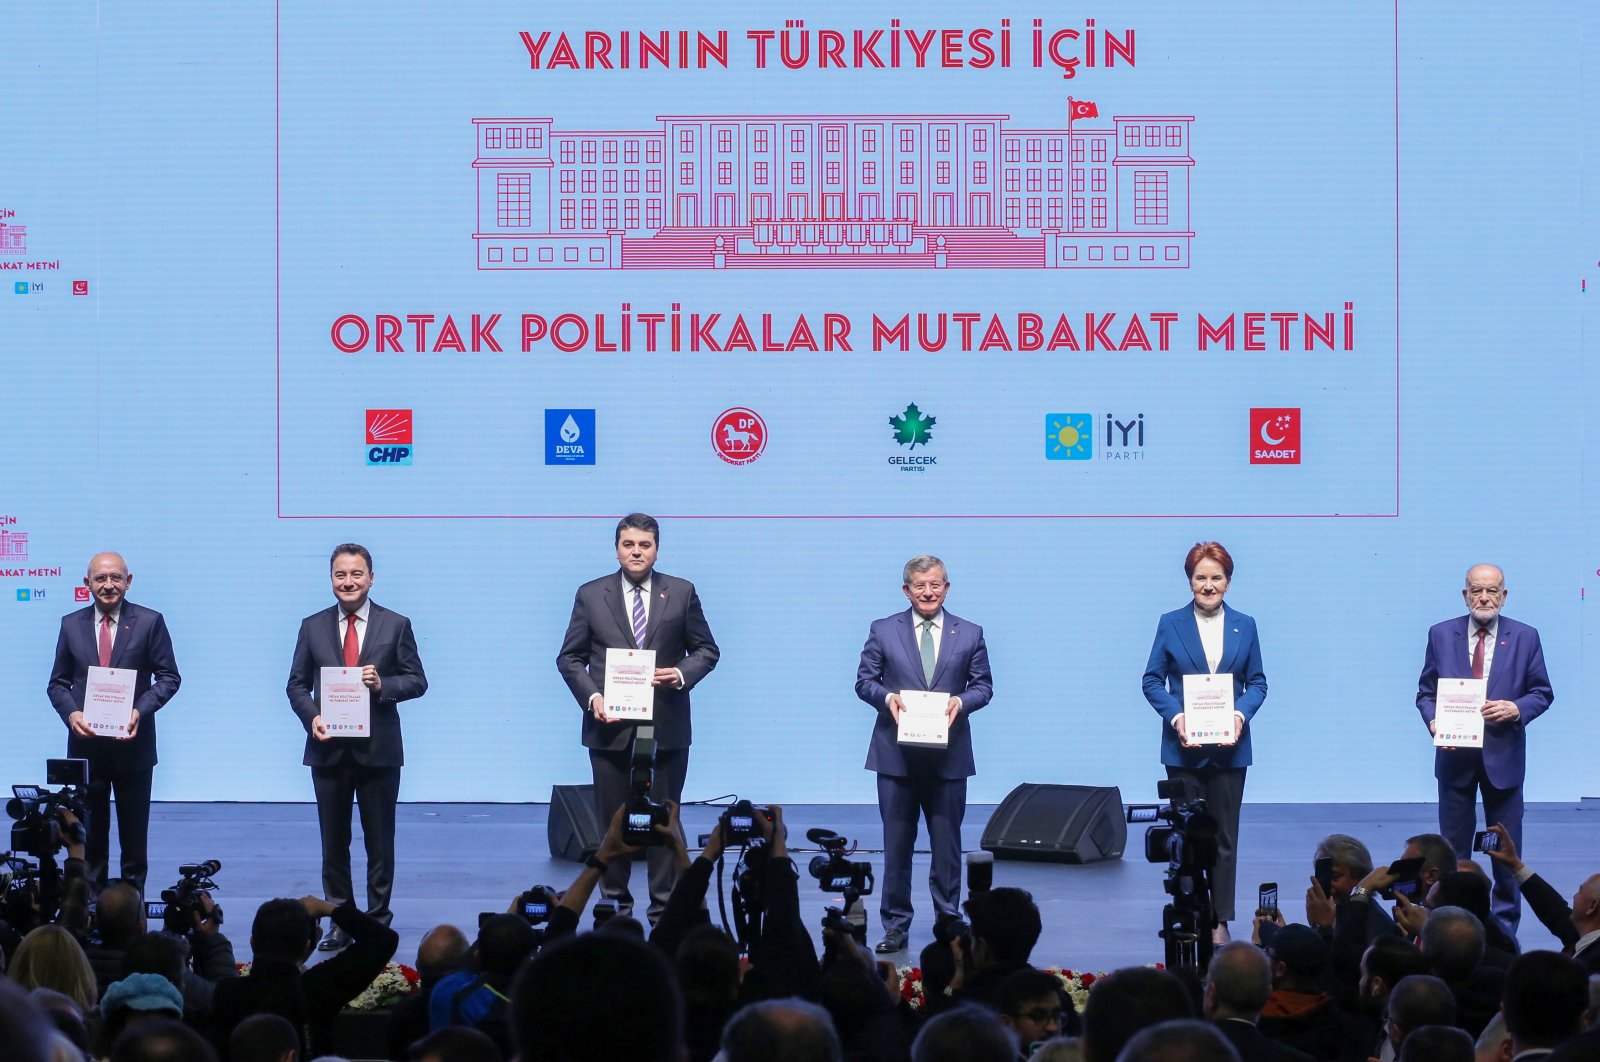 The leaders of the opposition bloc pose on stage before presenting the election program, in the capital Ankara, Türkiye, Jan. 30, 2023. (EPA Photo)